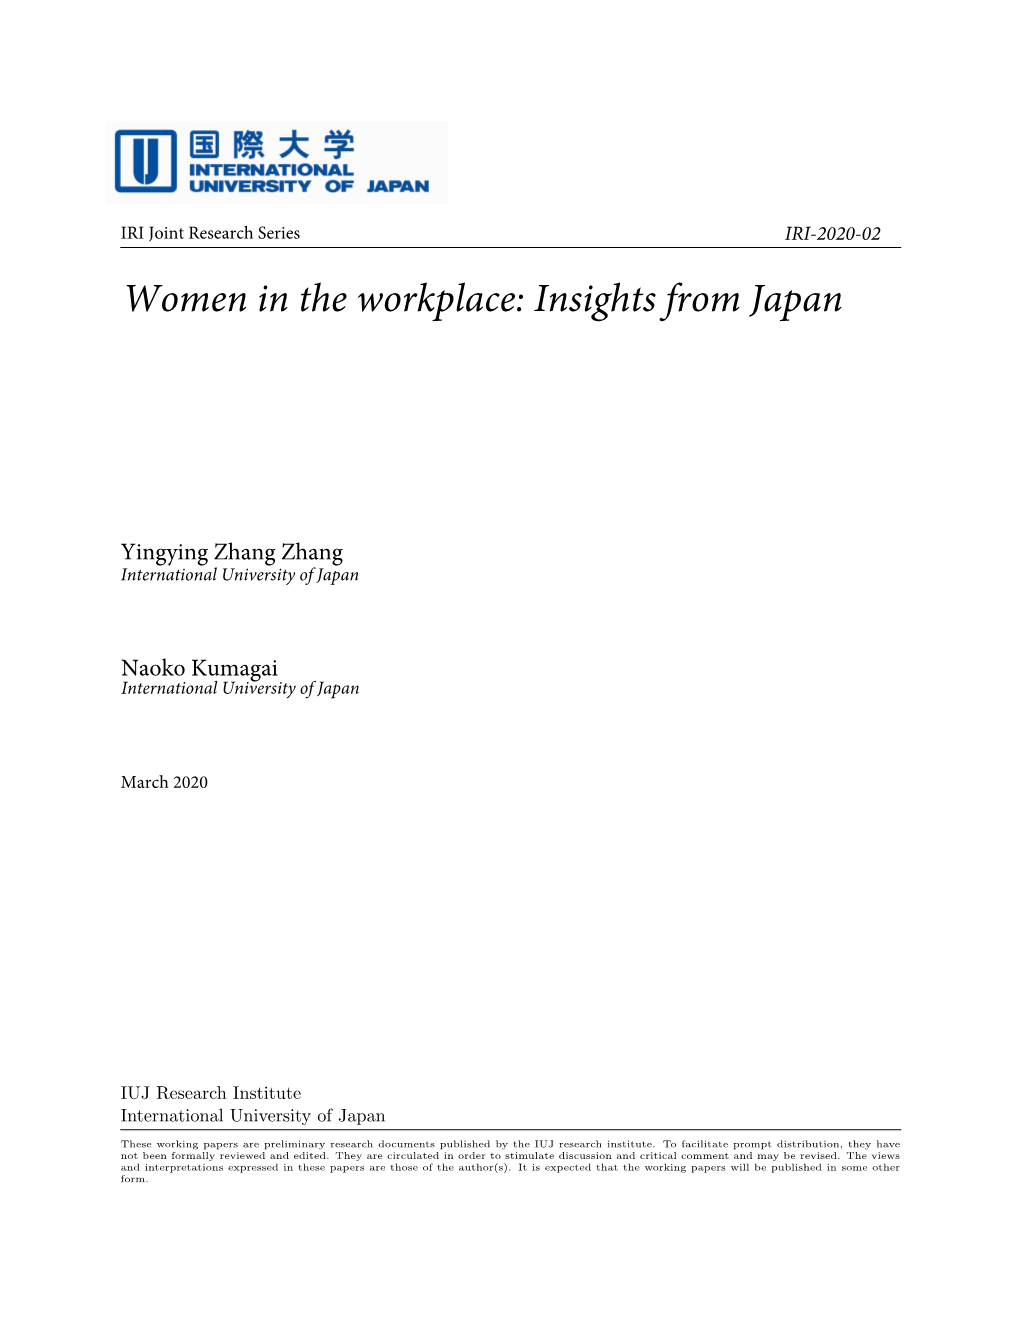 Women in the Workplace: Insights from Japan